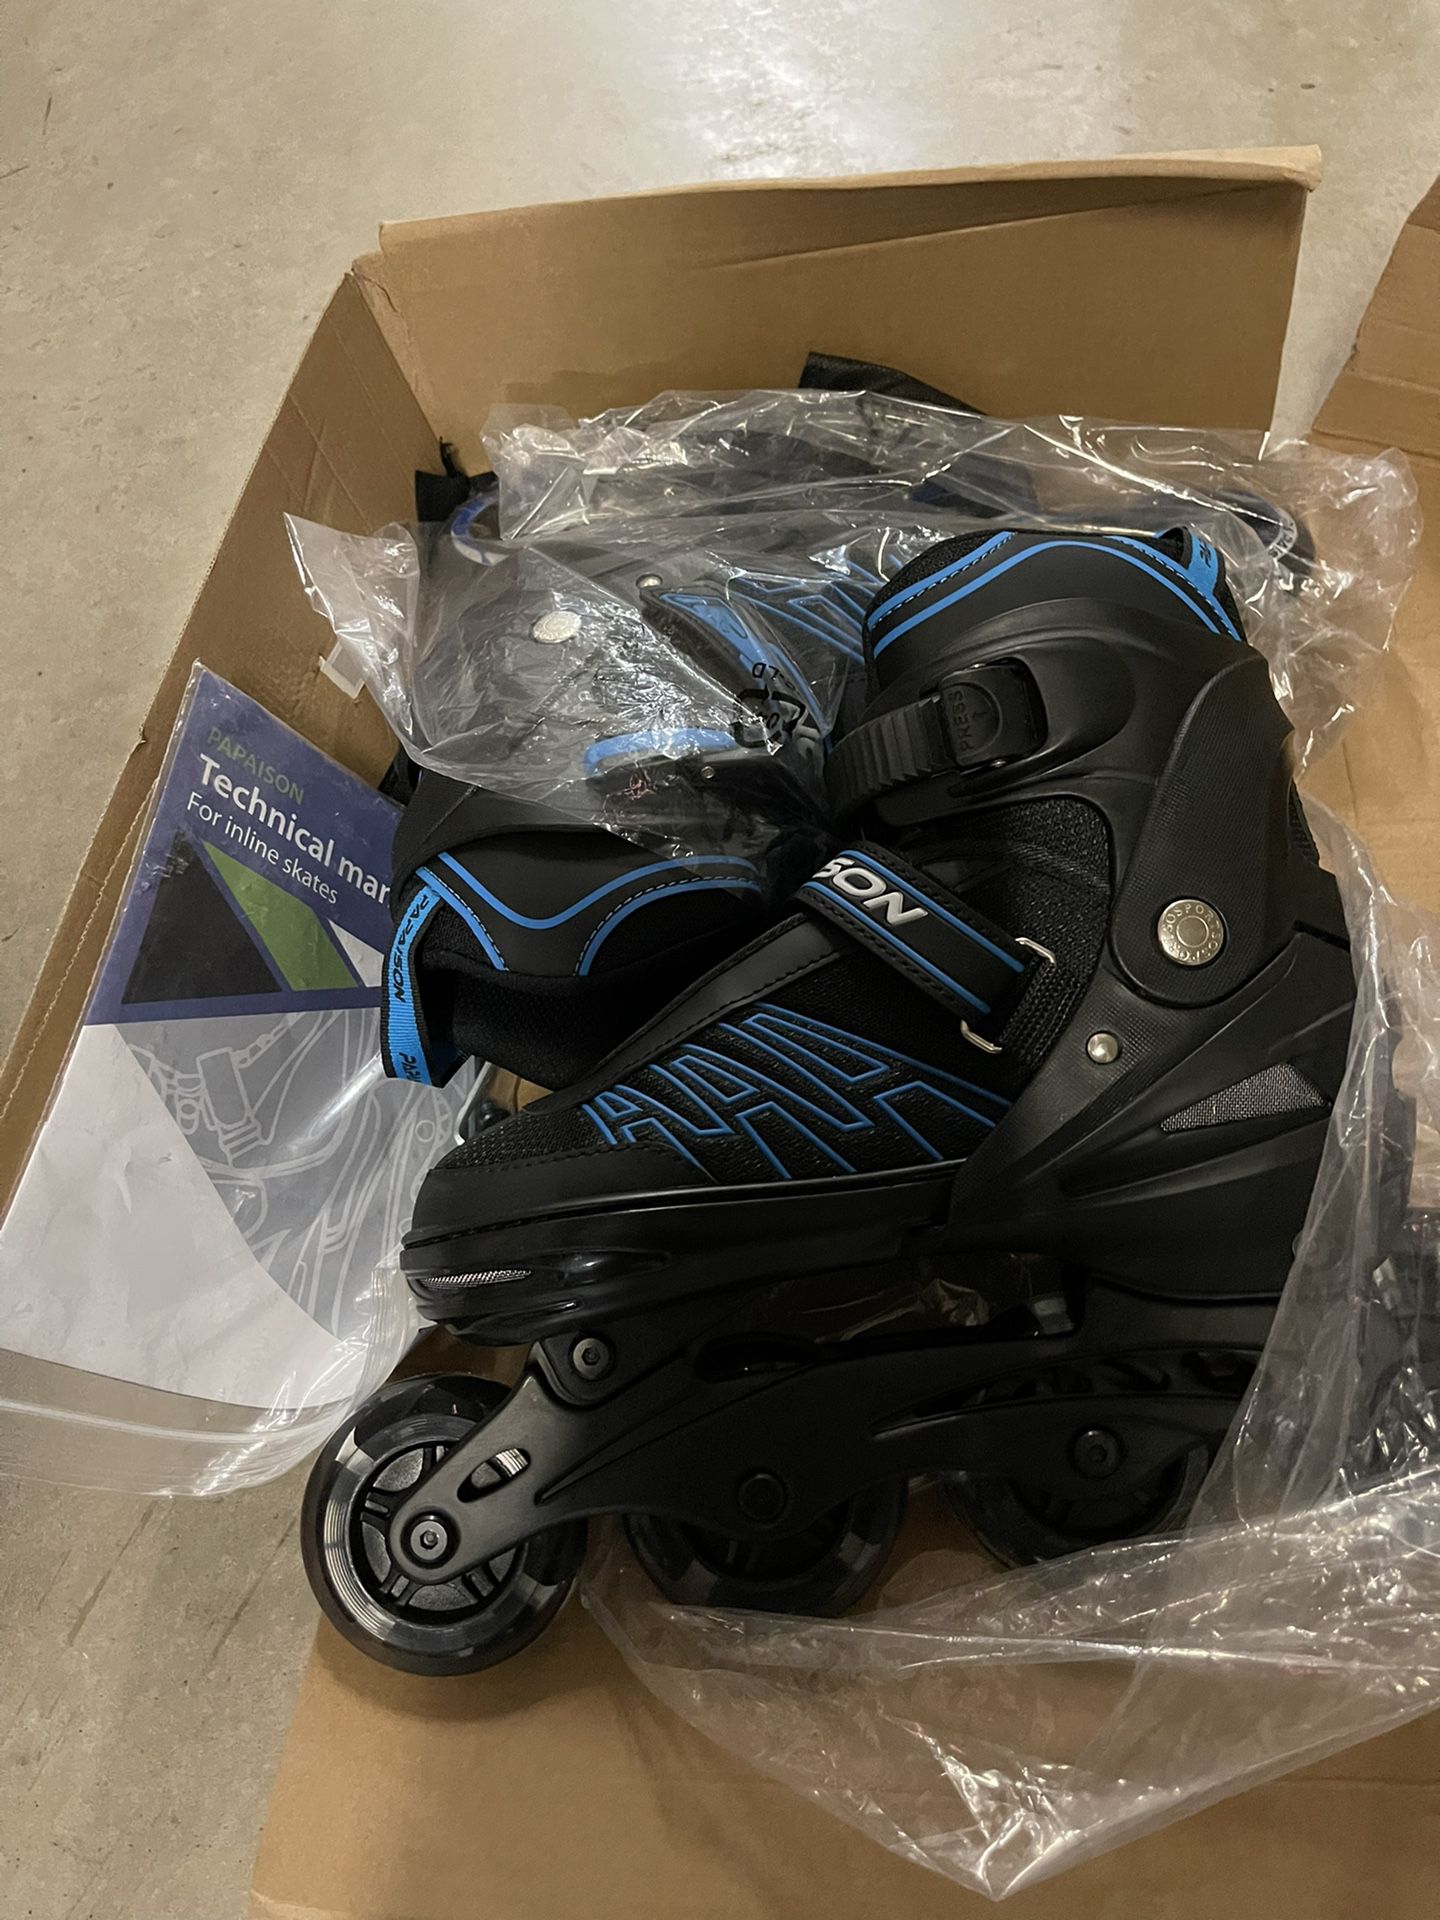 ITurnGlow Adjustable Inline Skates for Kids and Adults, Roller Skates with Featuring All Illuminating Wheels